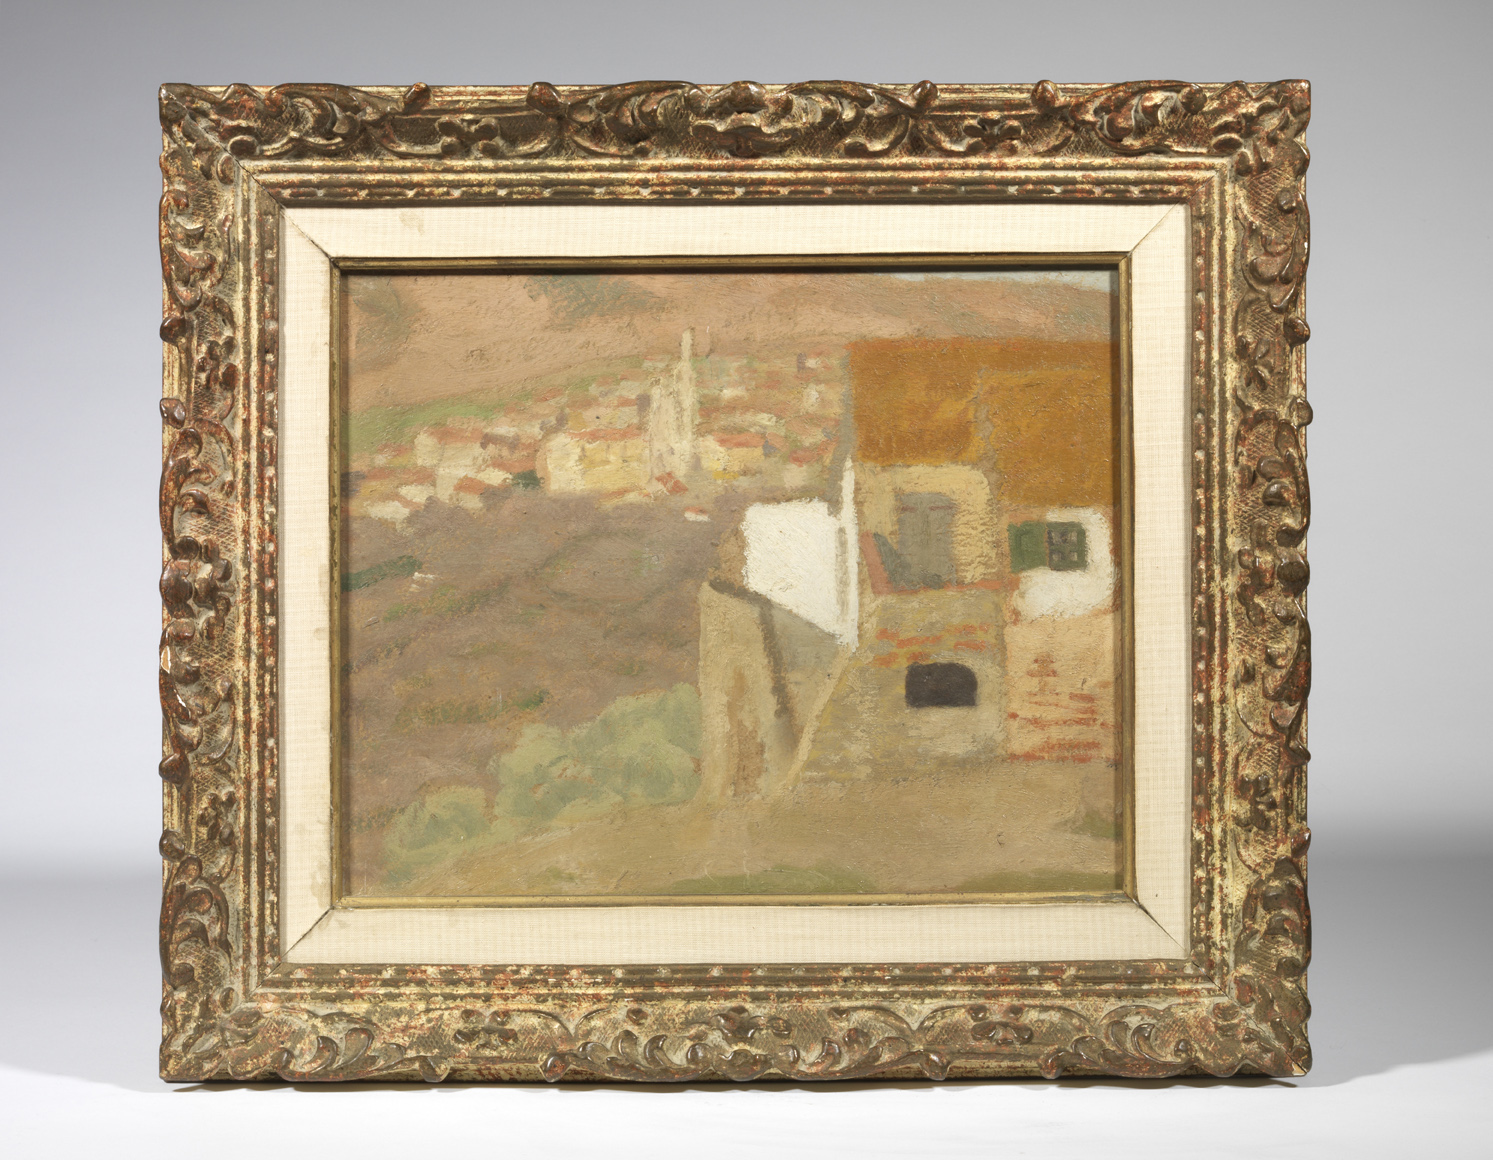 Distant View of Banyuls, painting, c. 1920